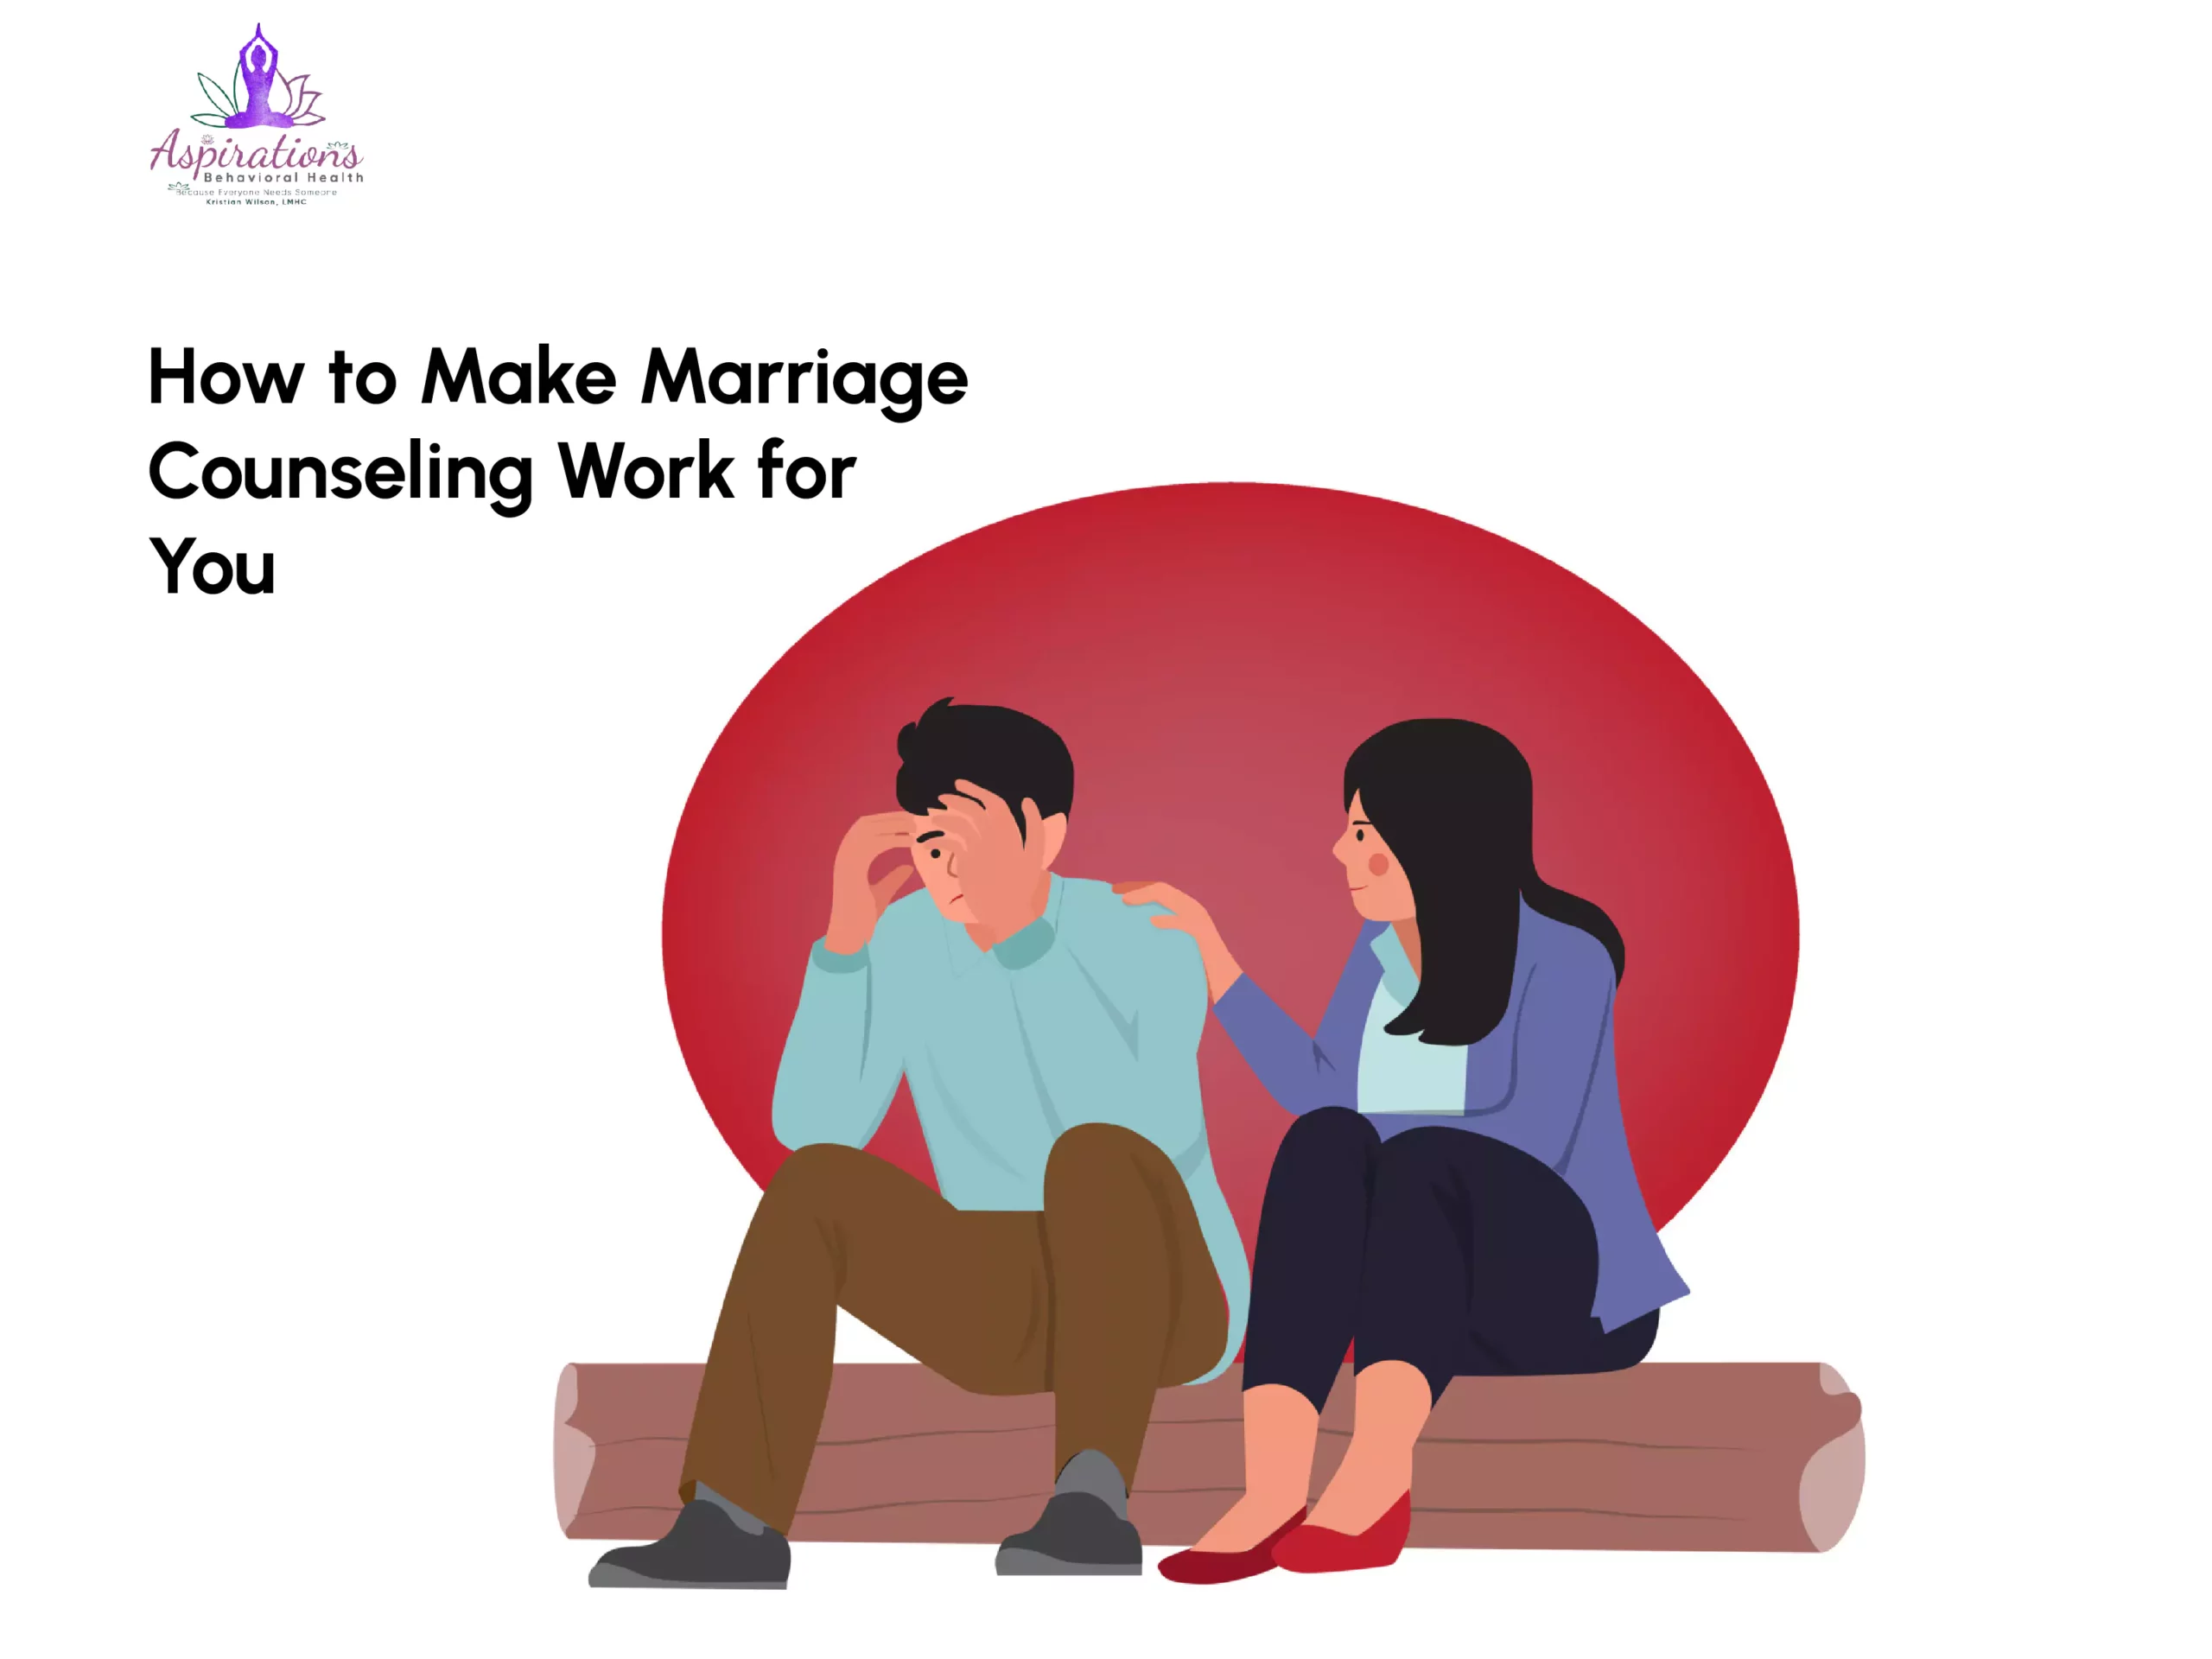 How to Make Marriage Counseling Work for You